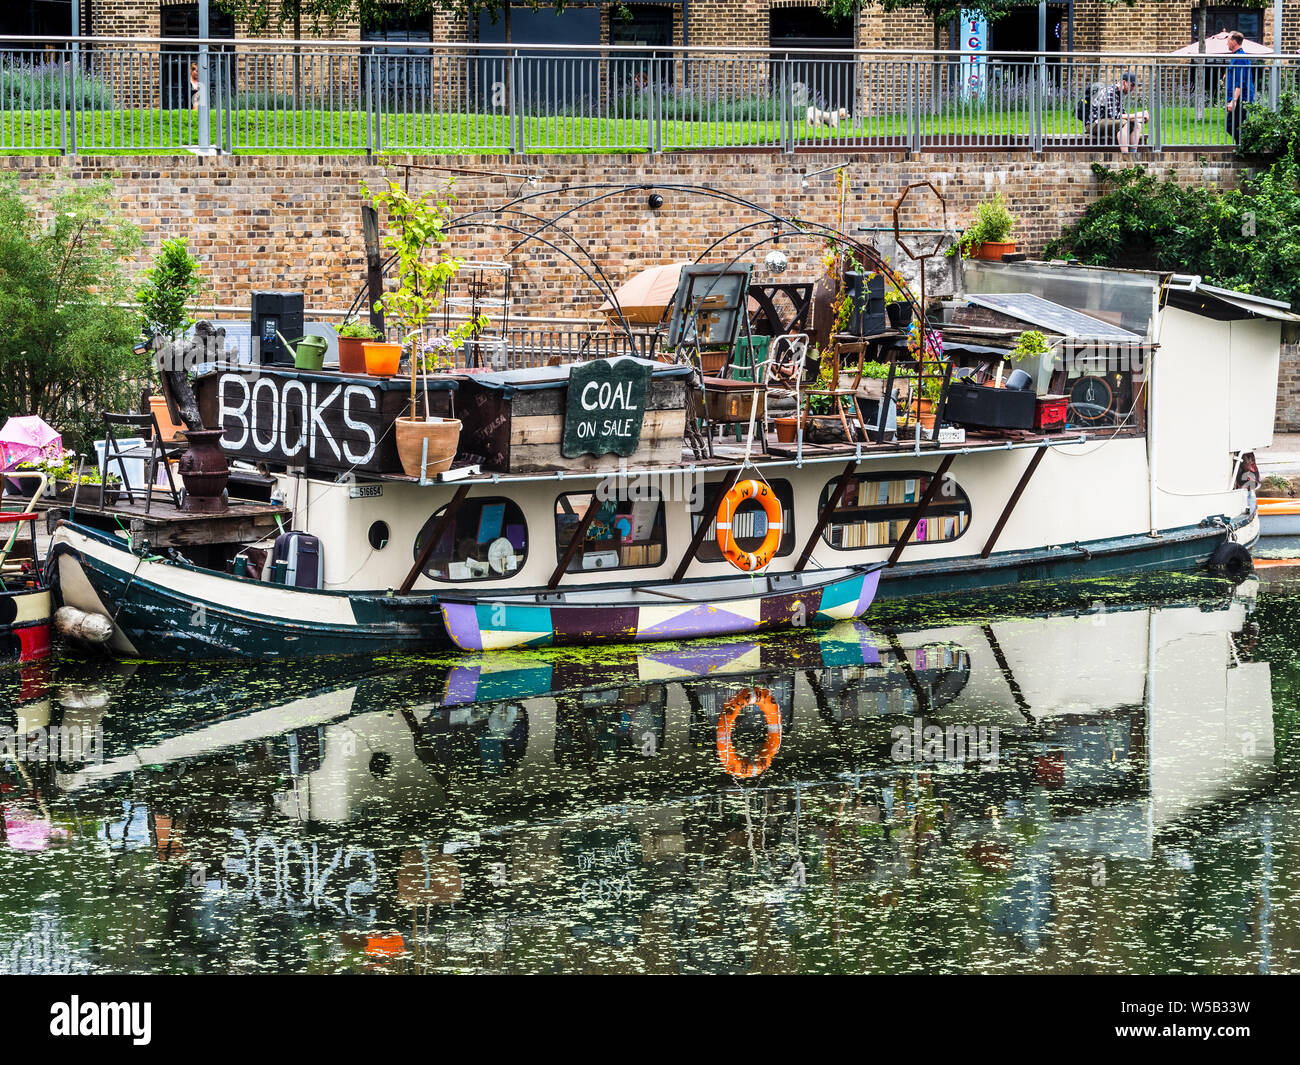 London Book Barge - die schwimmende Buchhandlung "Word on the Water" am Londoner Regent Canal Towpath in der Nähe der Kings Cross Station. Stockfoto